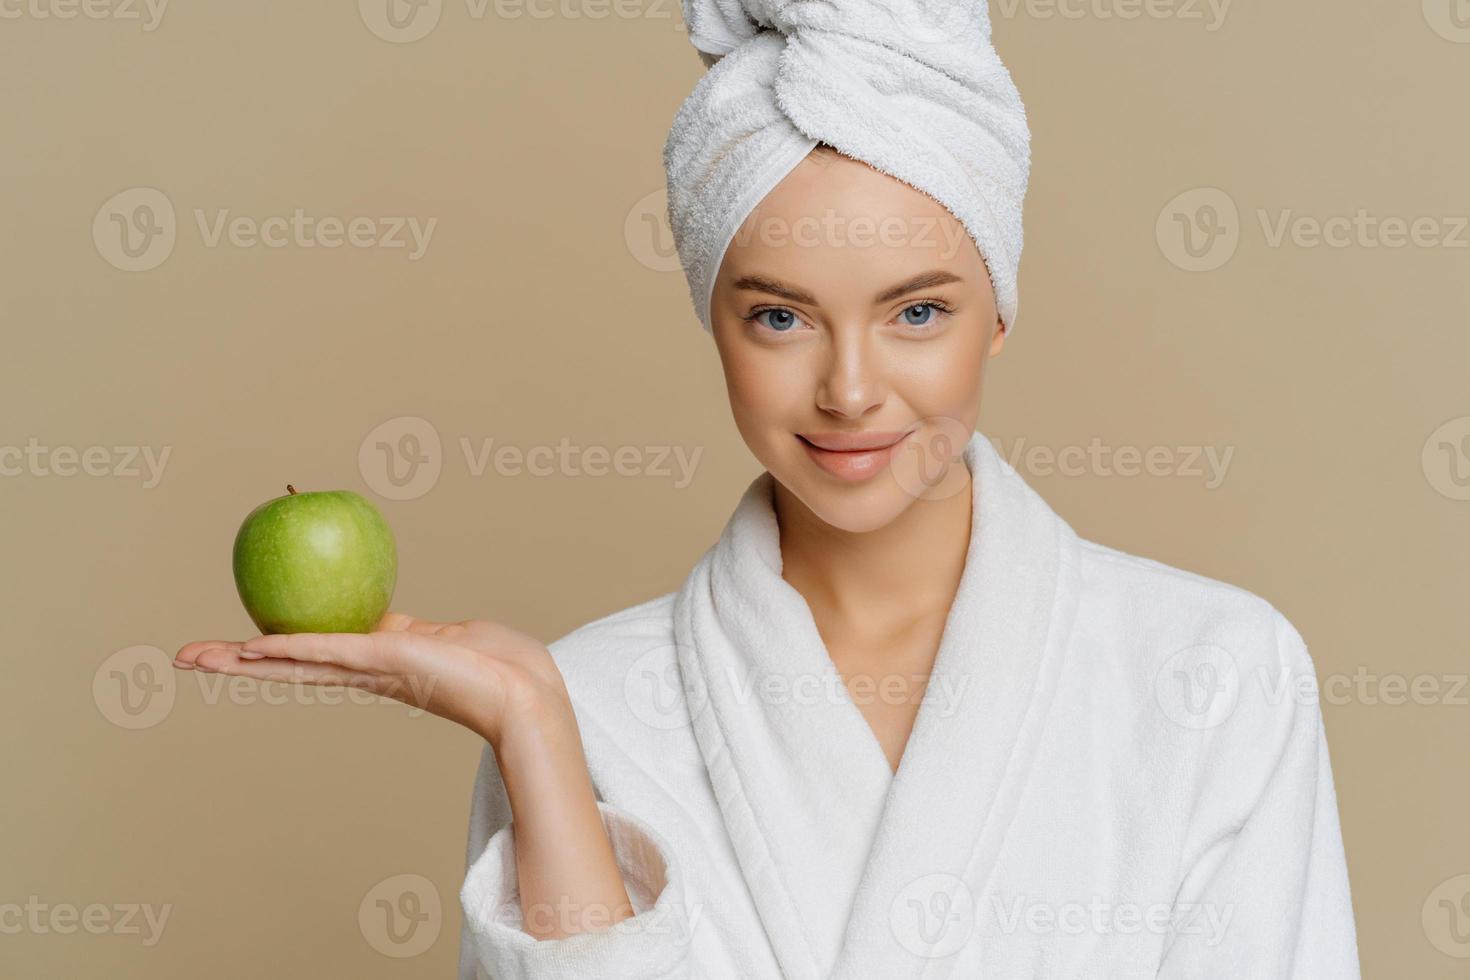 Studio shot of young woman moisturizes face with fresh apple dressed in shite coat wrapped towel on head after taking shower isolatedover brown background. Natural beauty and hygiene concept photo